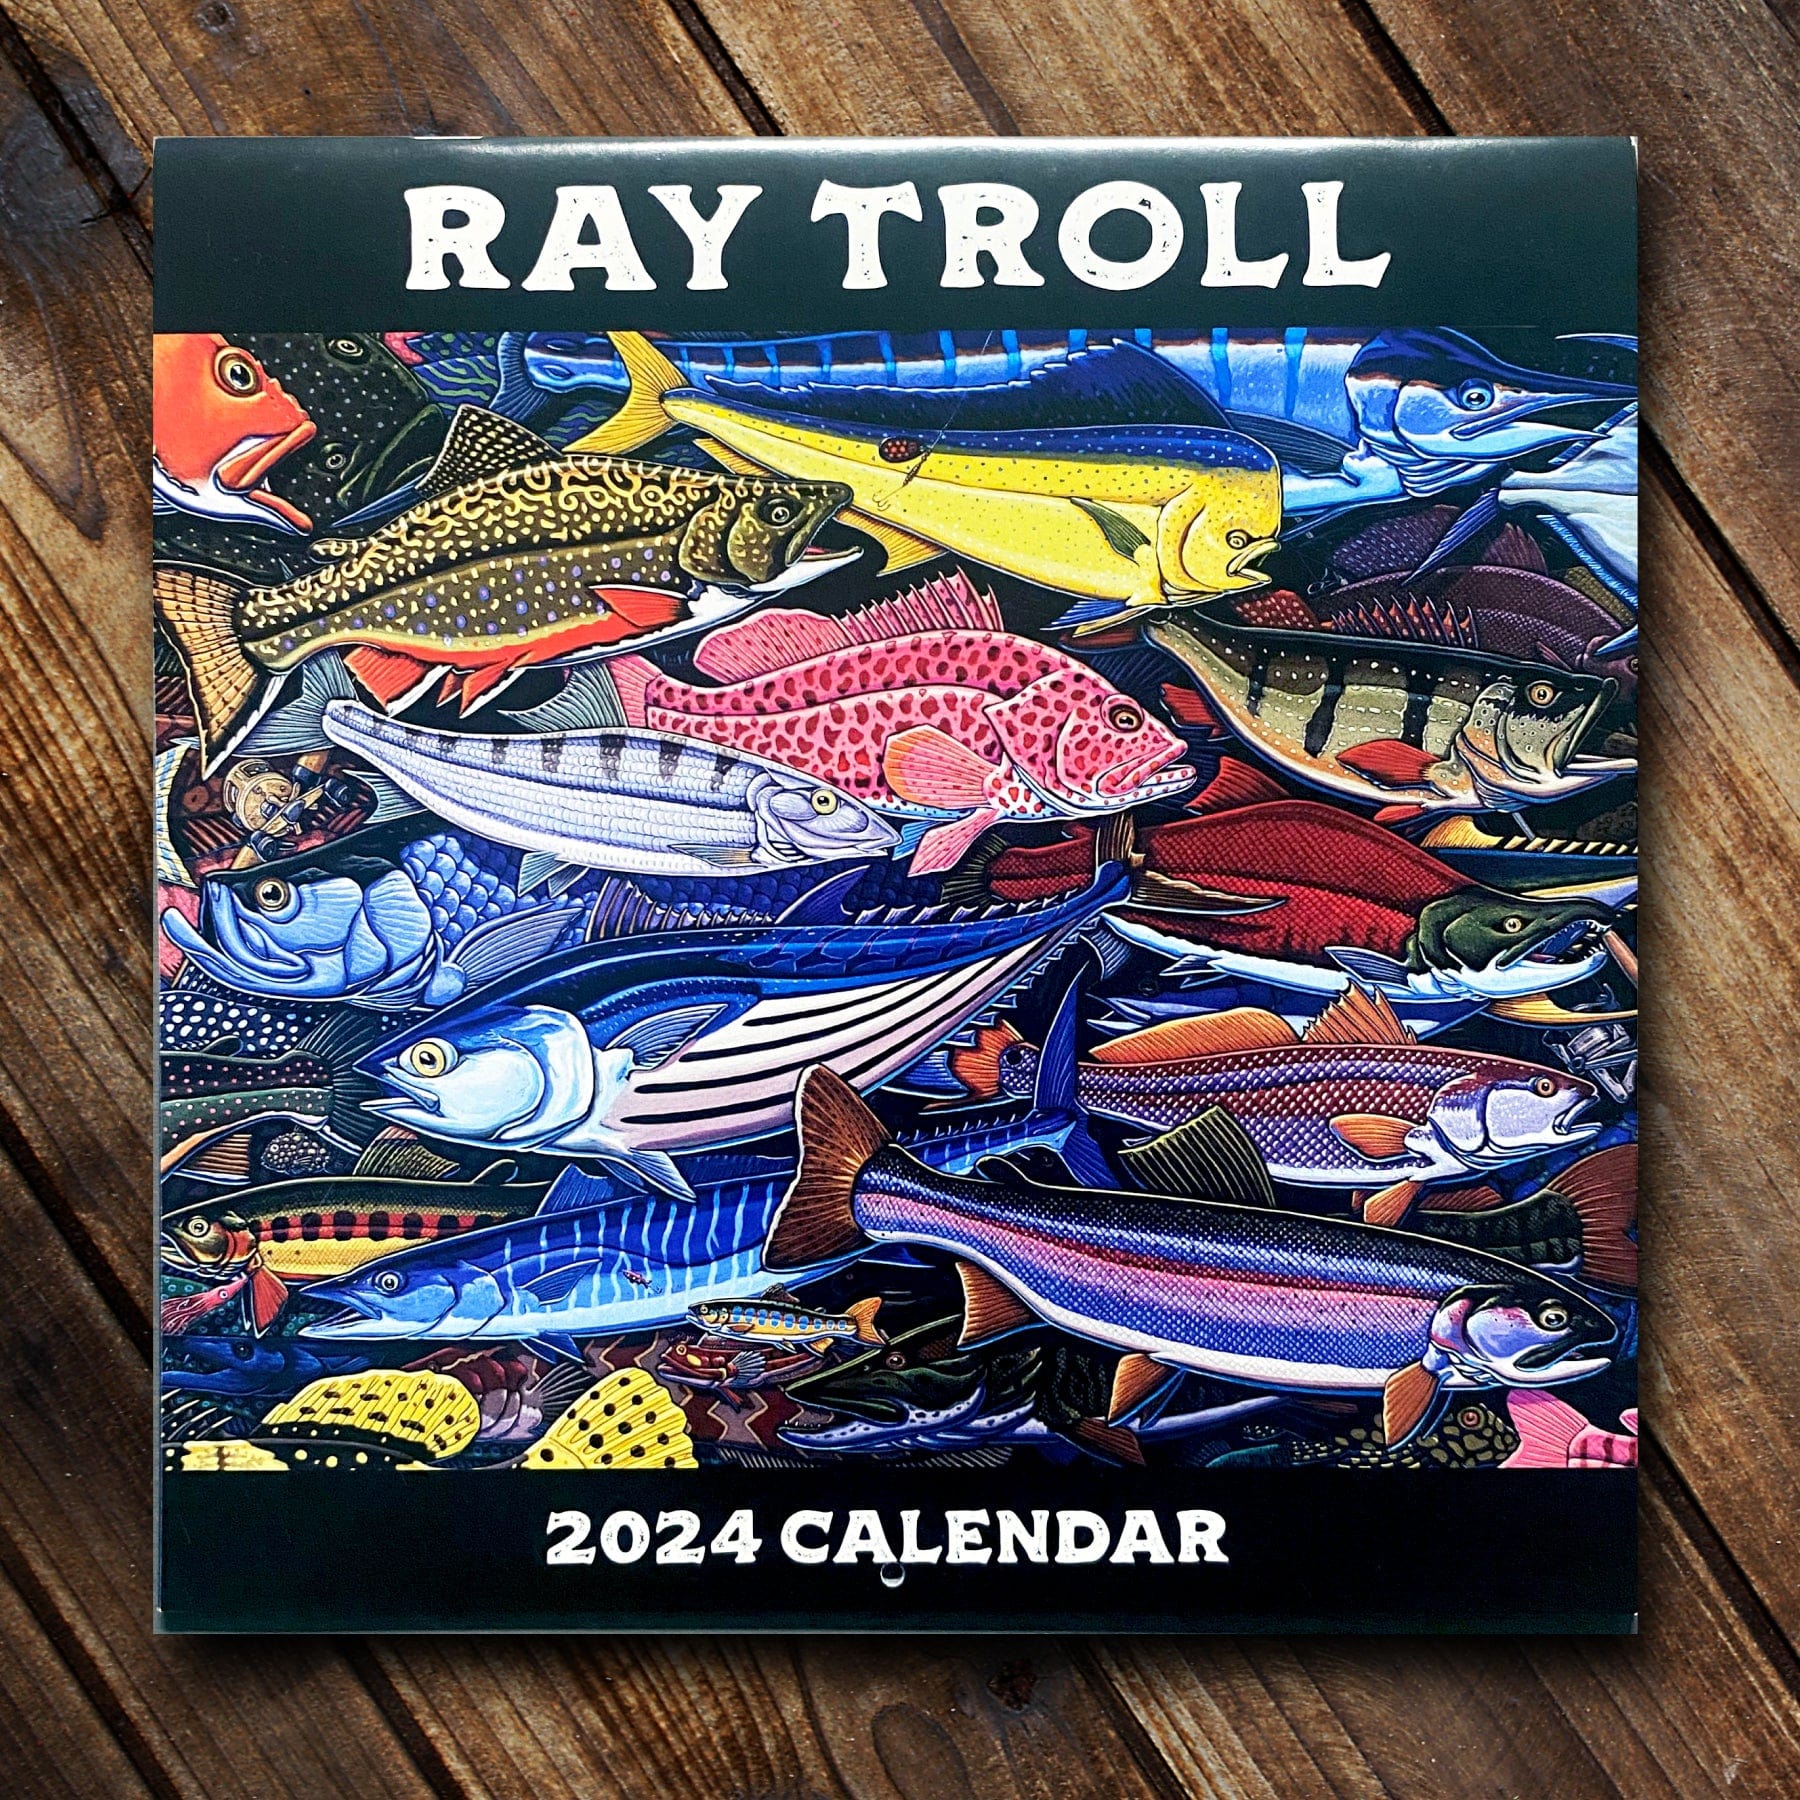 2024 12-Month Ray Troll Calendar: cover pictured shows a close up of a colorful assortment of fish illustrated in Ray Troll's unique style.